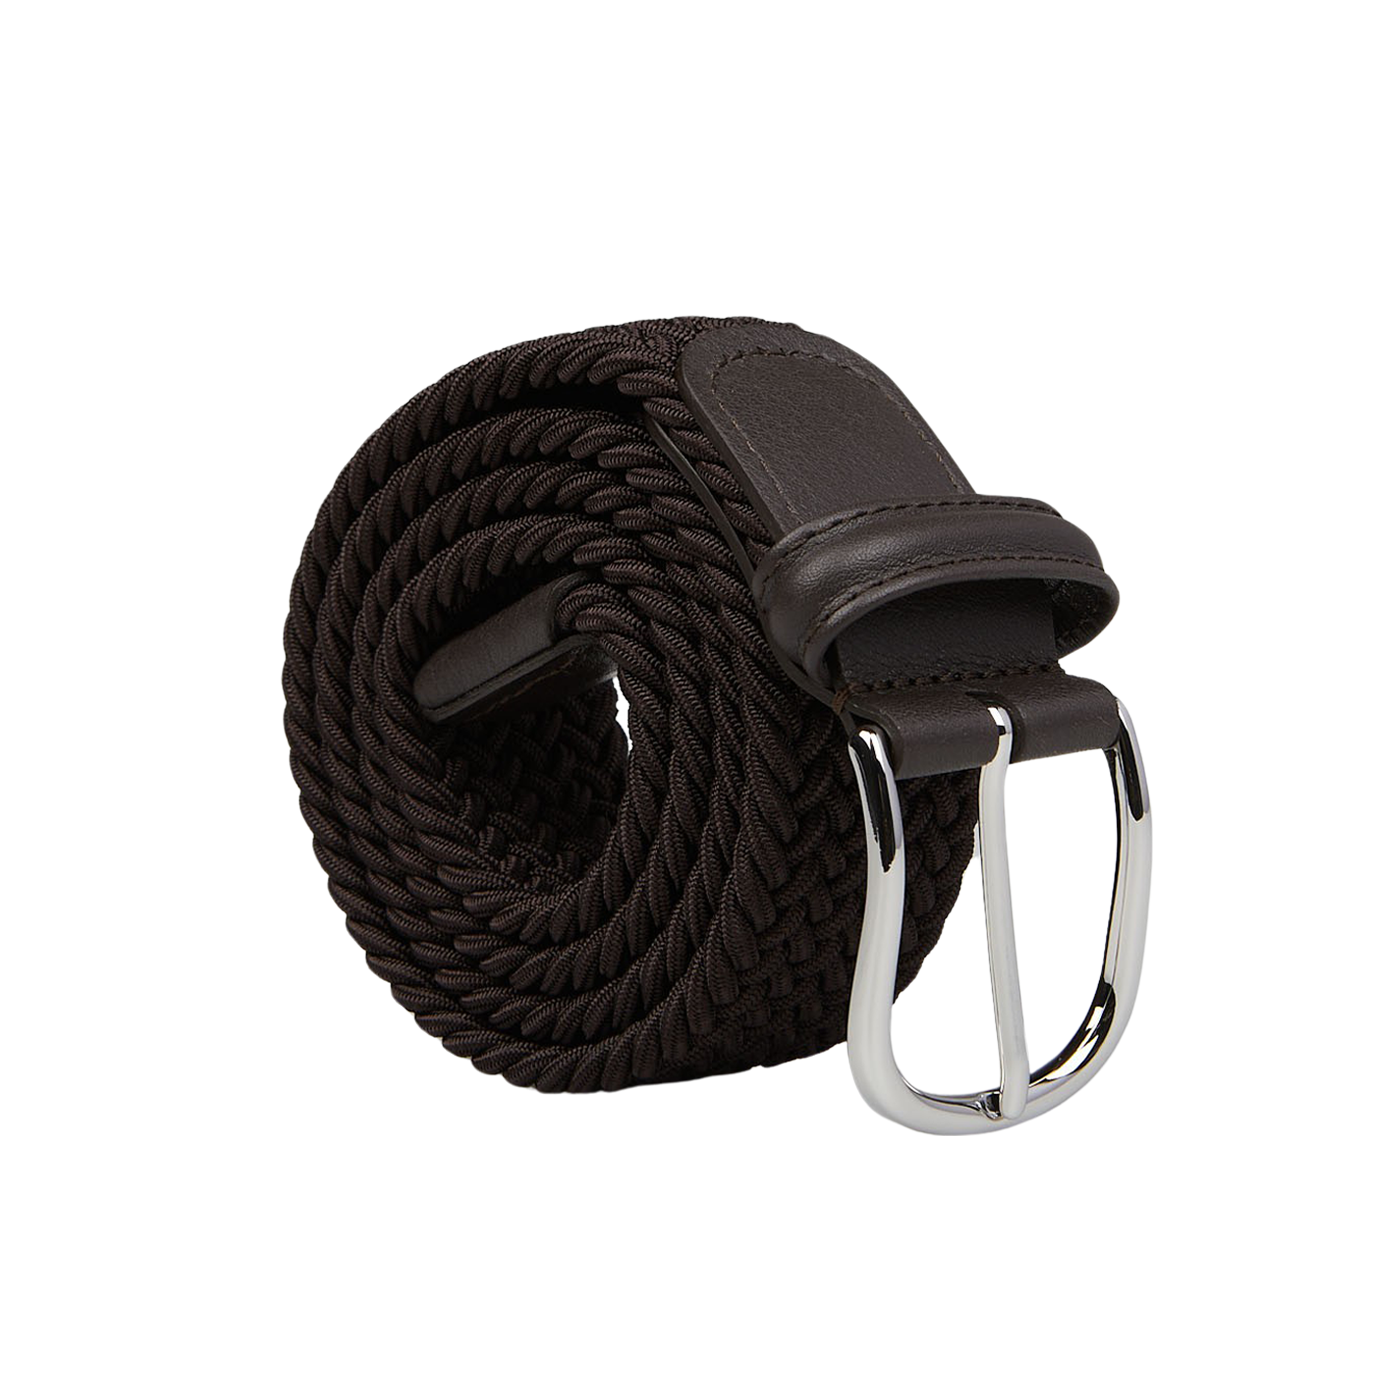 A Dark Brown Elastic Woven 35mm Belt with a silver buckle, handmade in Italy by Anderson's, set against a gray background.